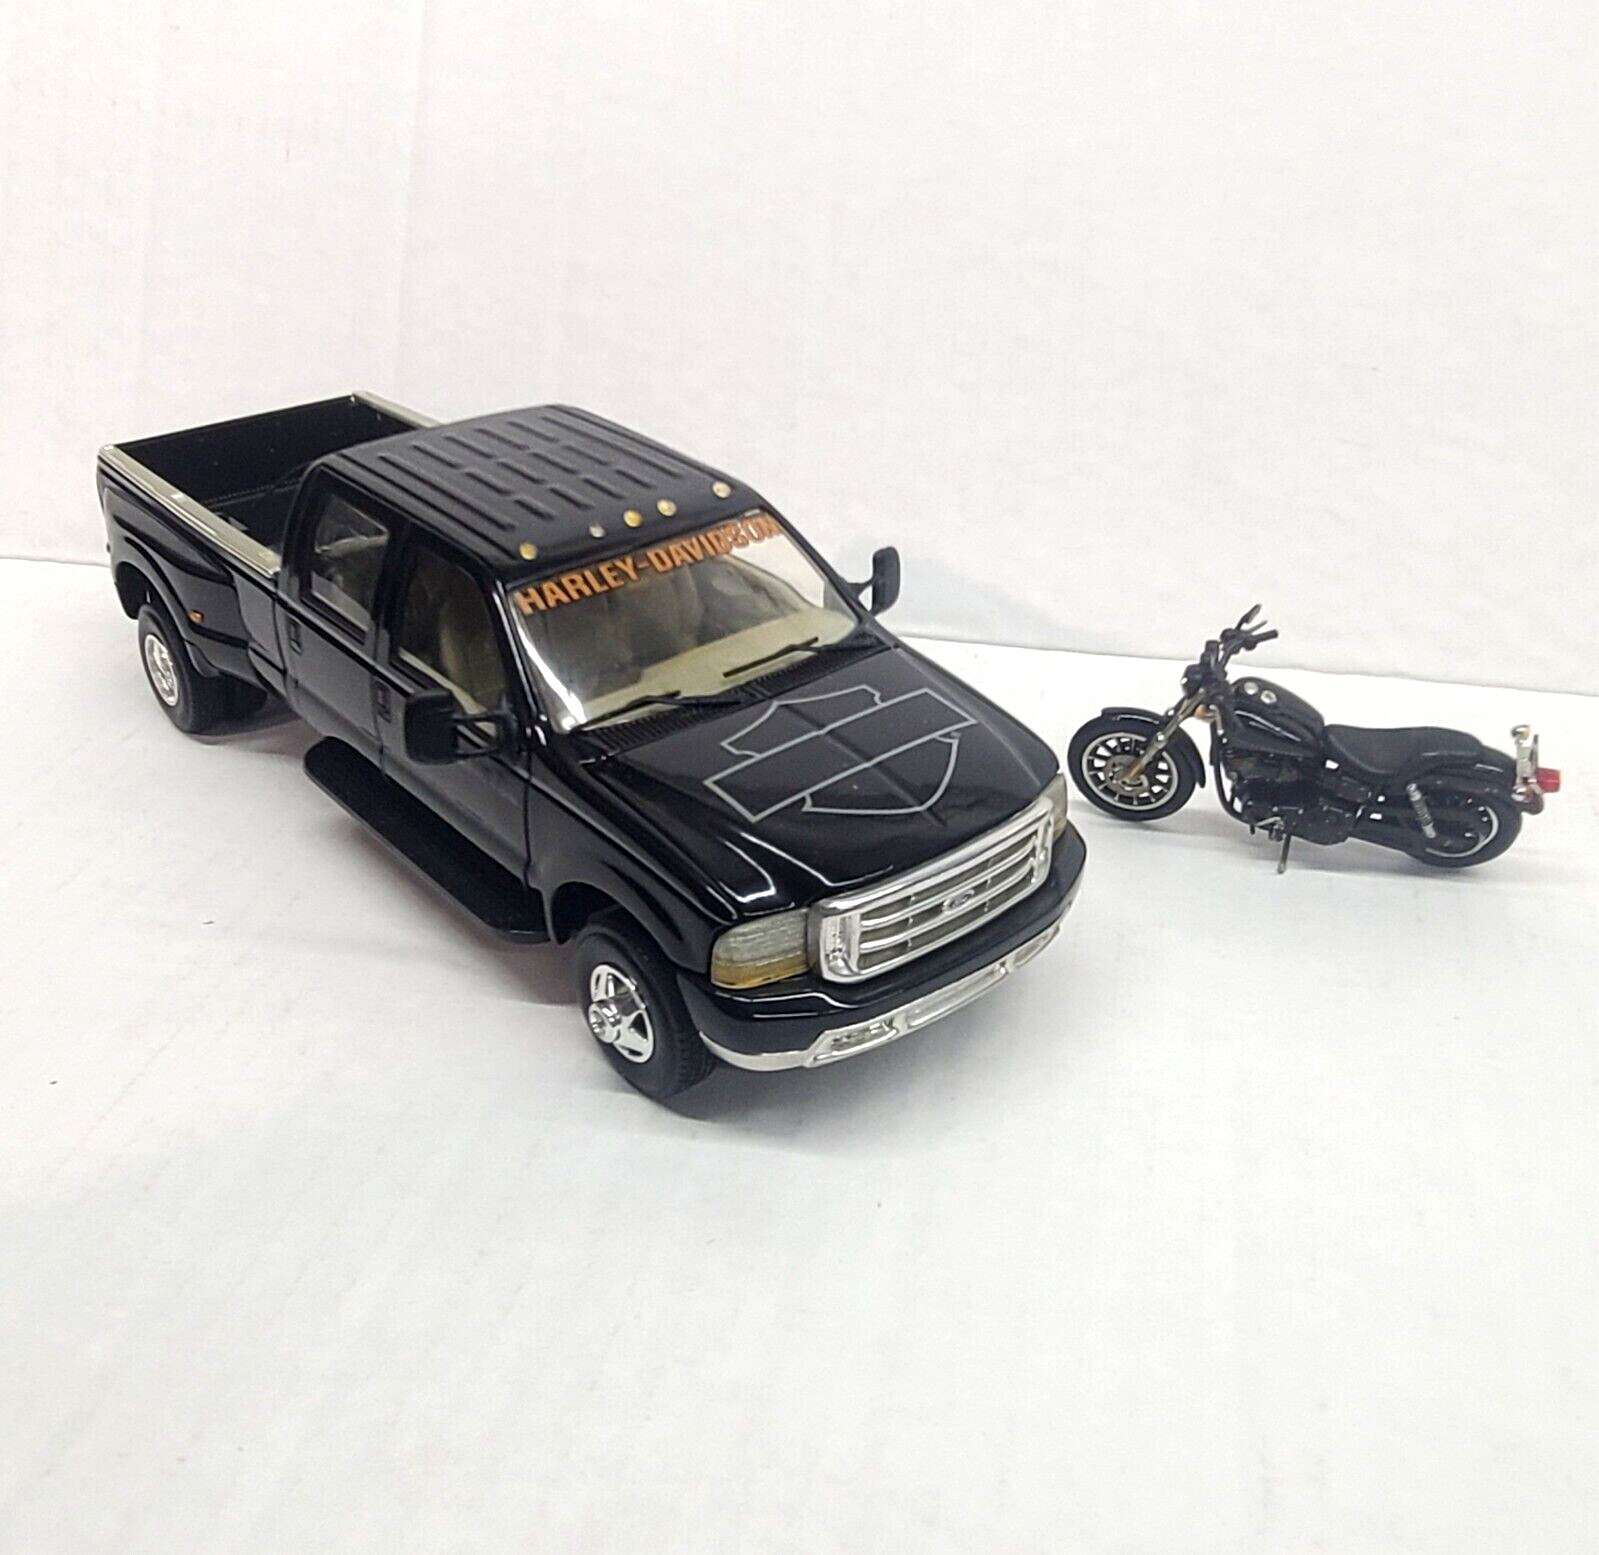 Vintage '99 Limited Edition Harley Ford Crew Cab W/ FXDX Die Cast 9796-1-00V